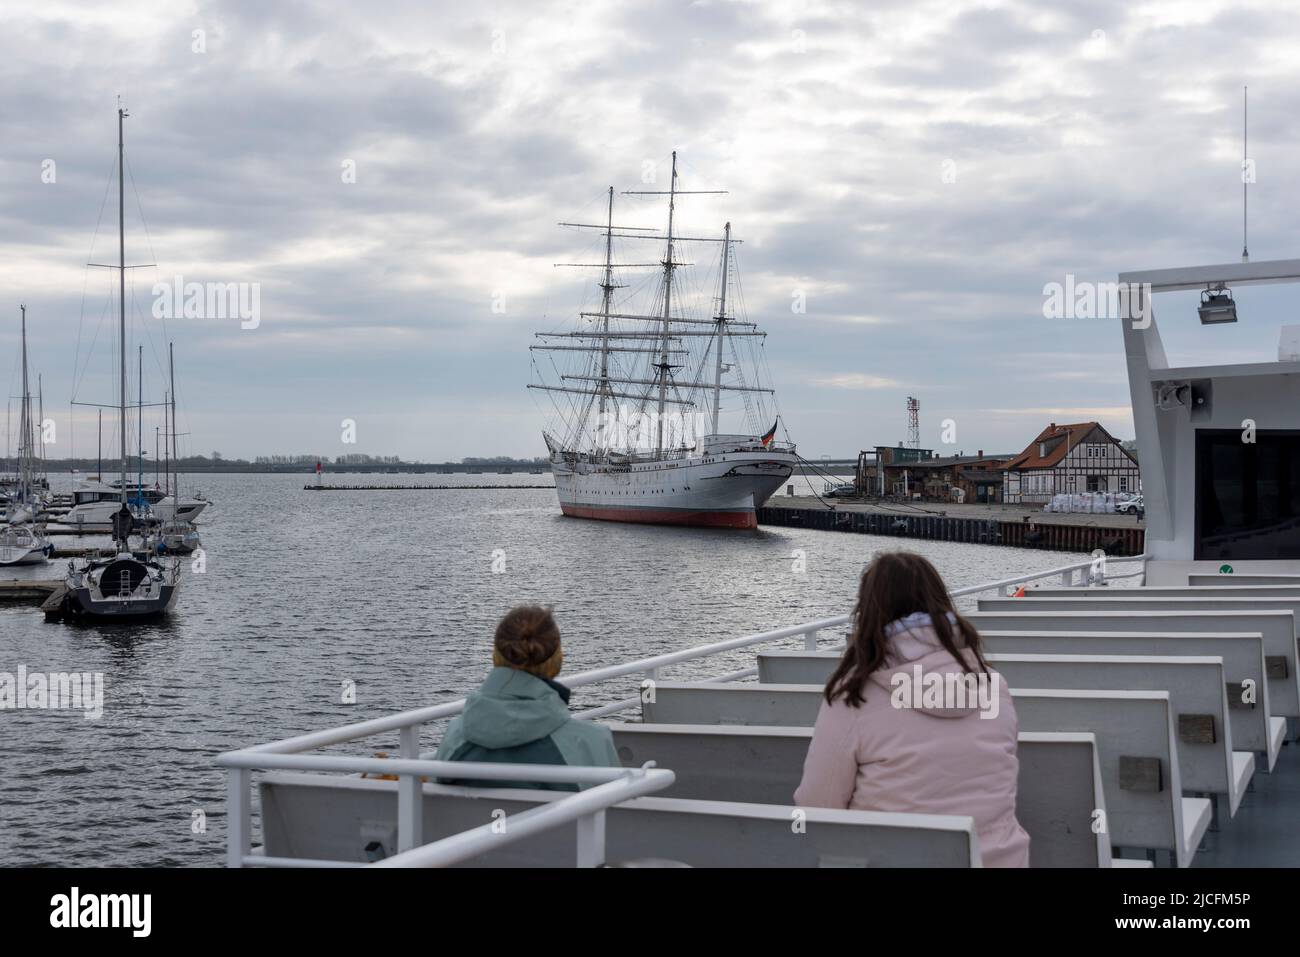 Excursion ship with two tourists, behind them sailing ship Gorch Fock, city harbor Stralsund, Mecklenburg-Western Pomerania, Germany Stock Photo